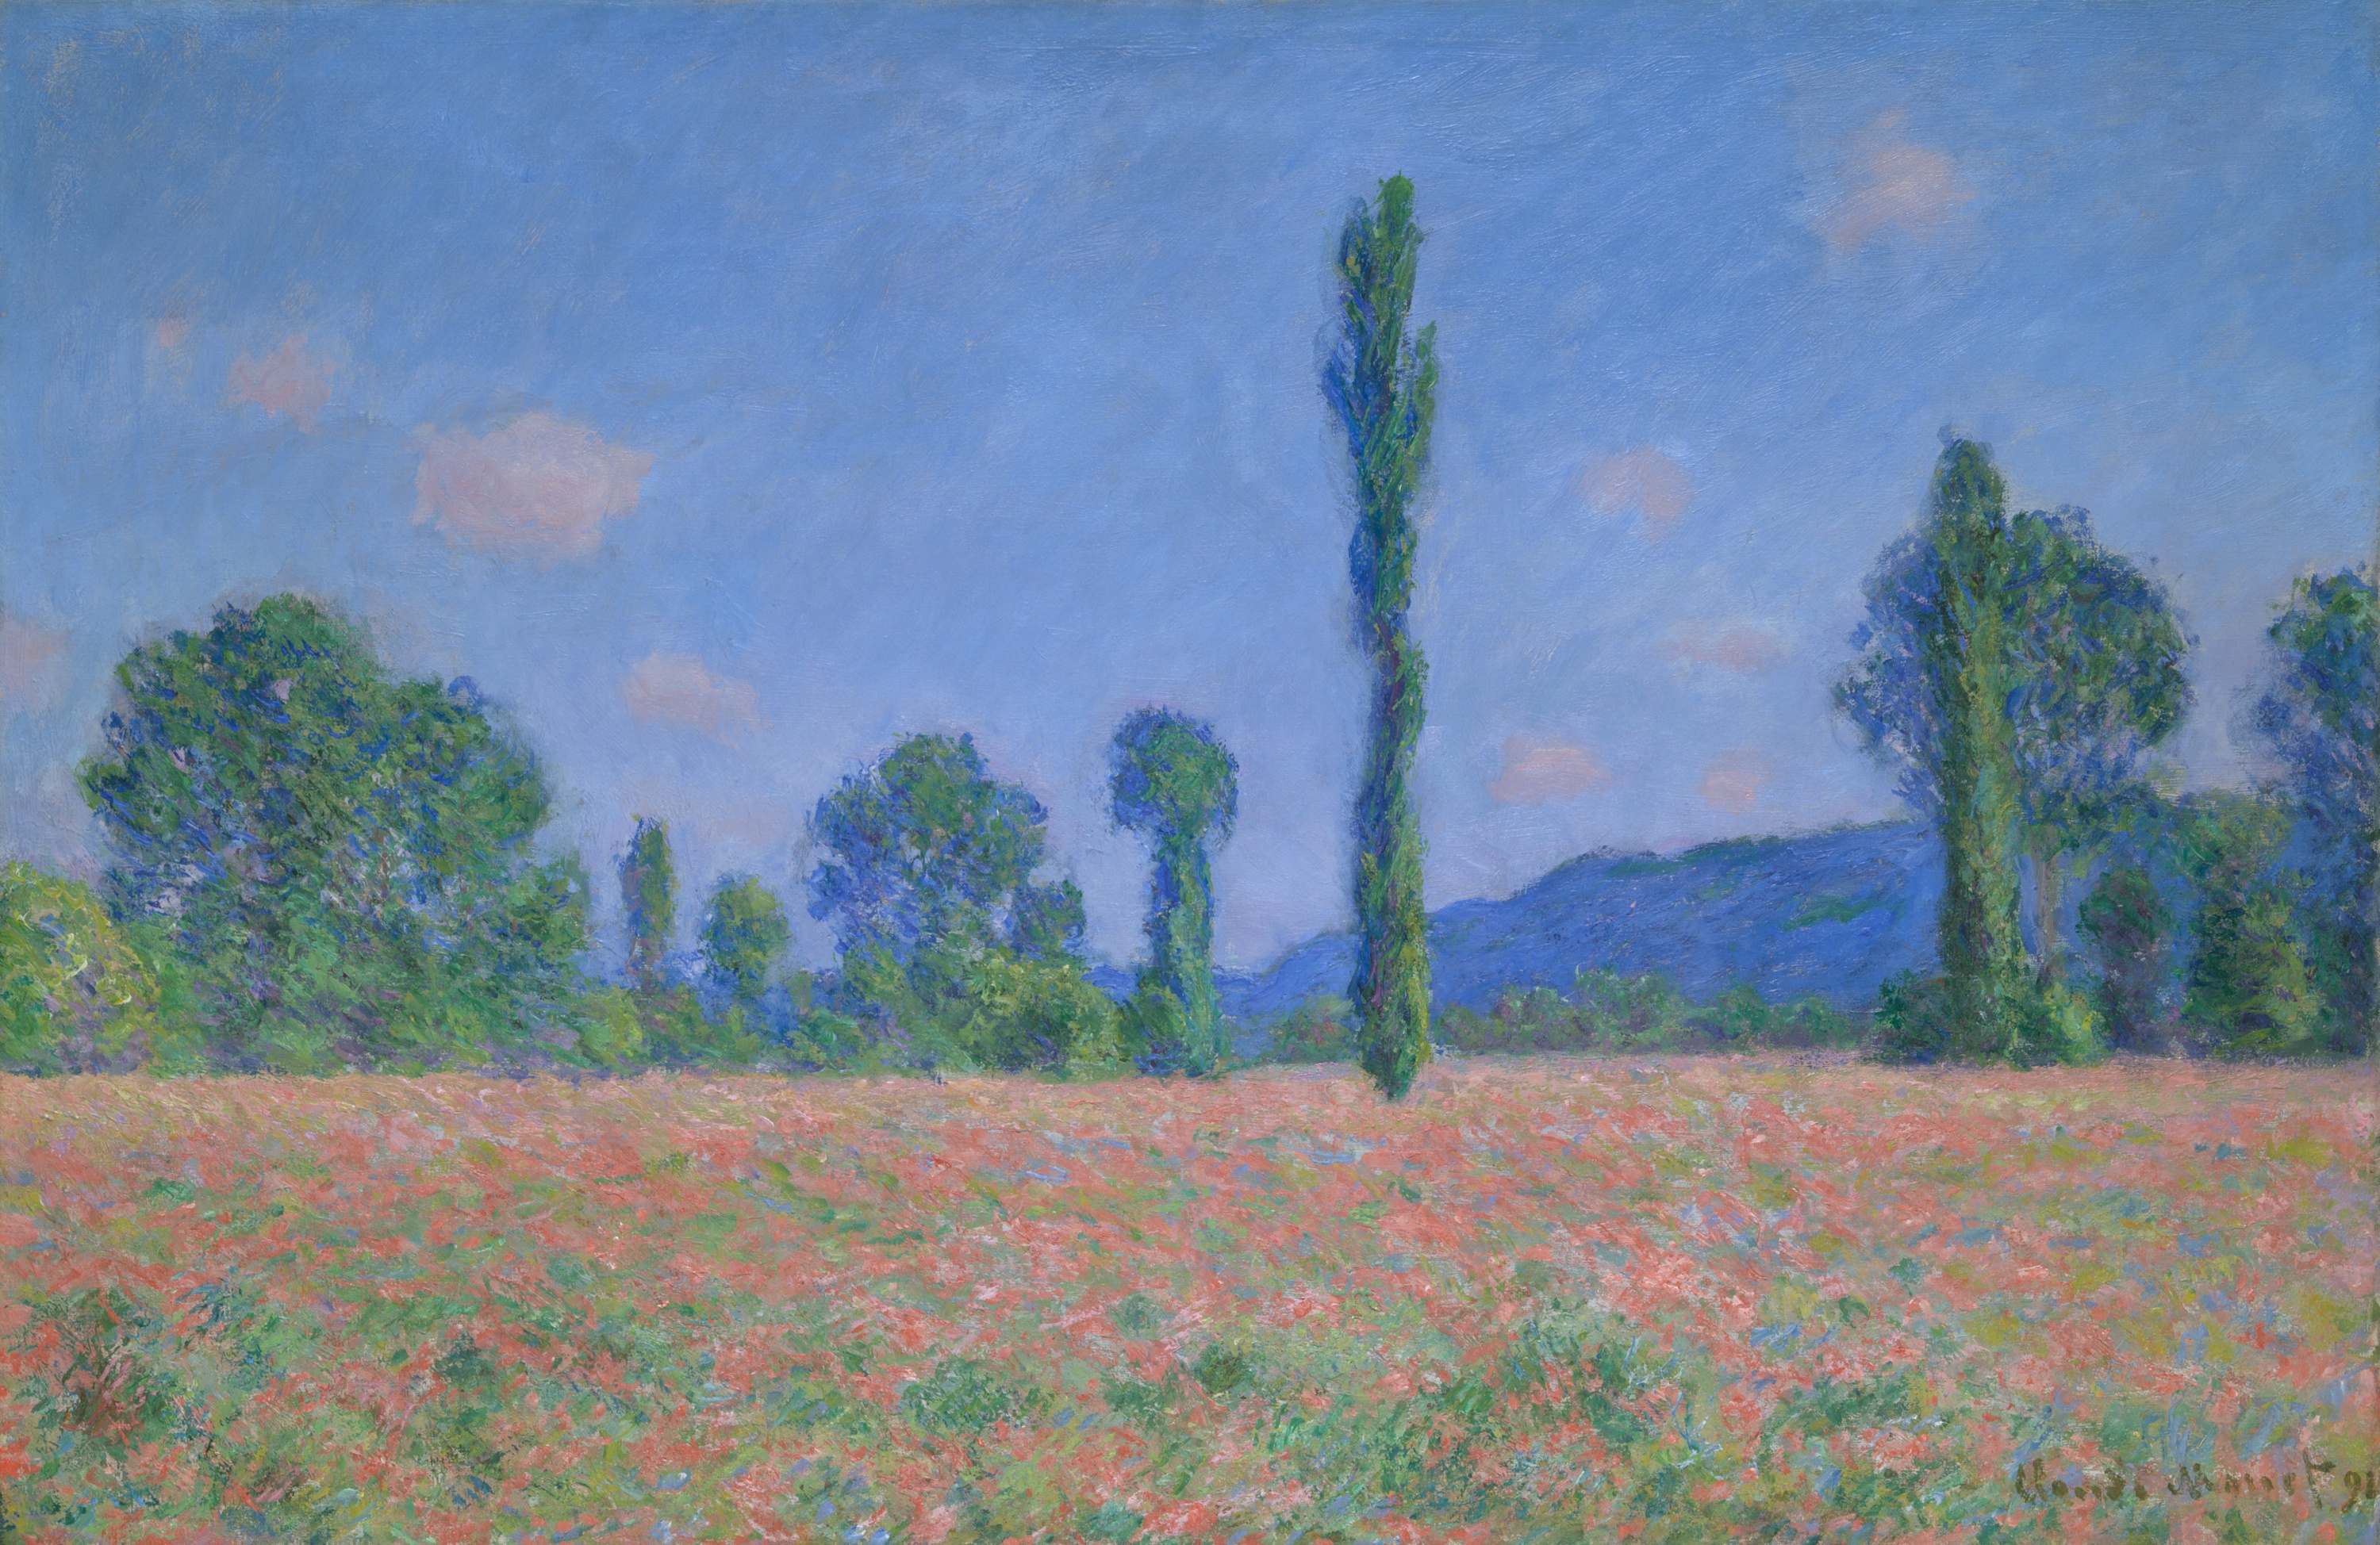 Campo de Papoilas (Giverny) by Claude Monet - 1890/91 - 61,2 × 93,4 cm Art Institute of Chicago